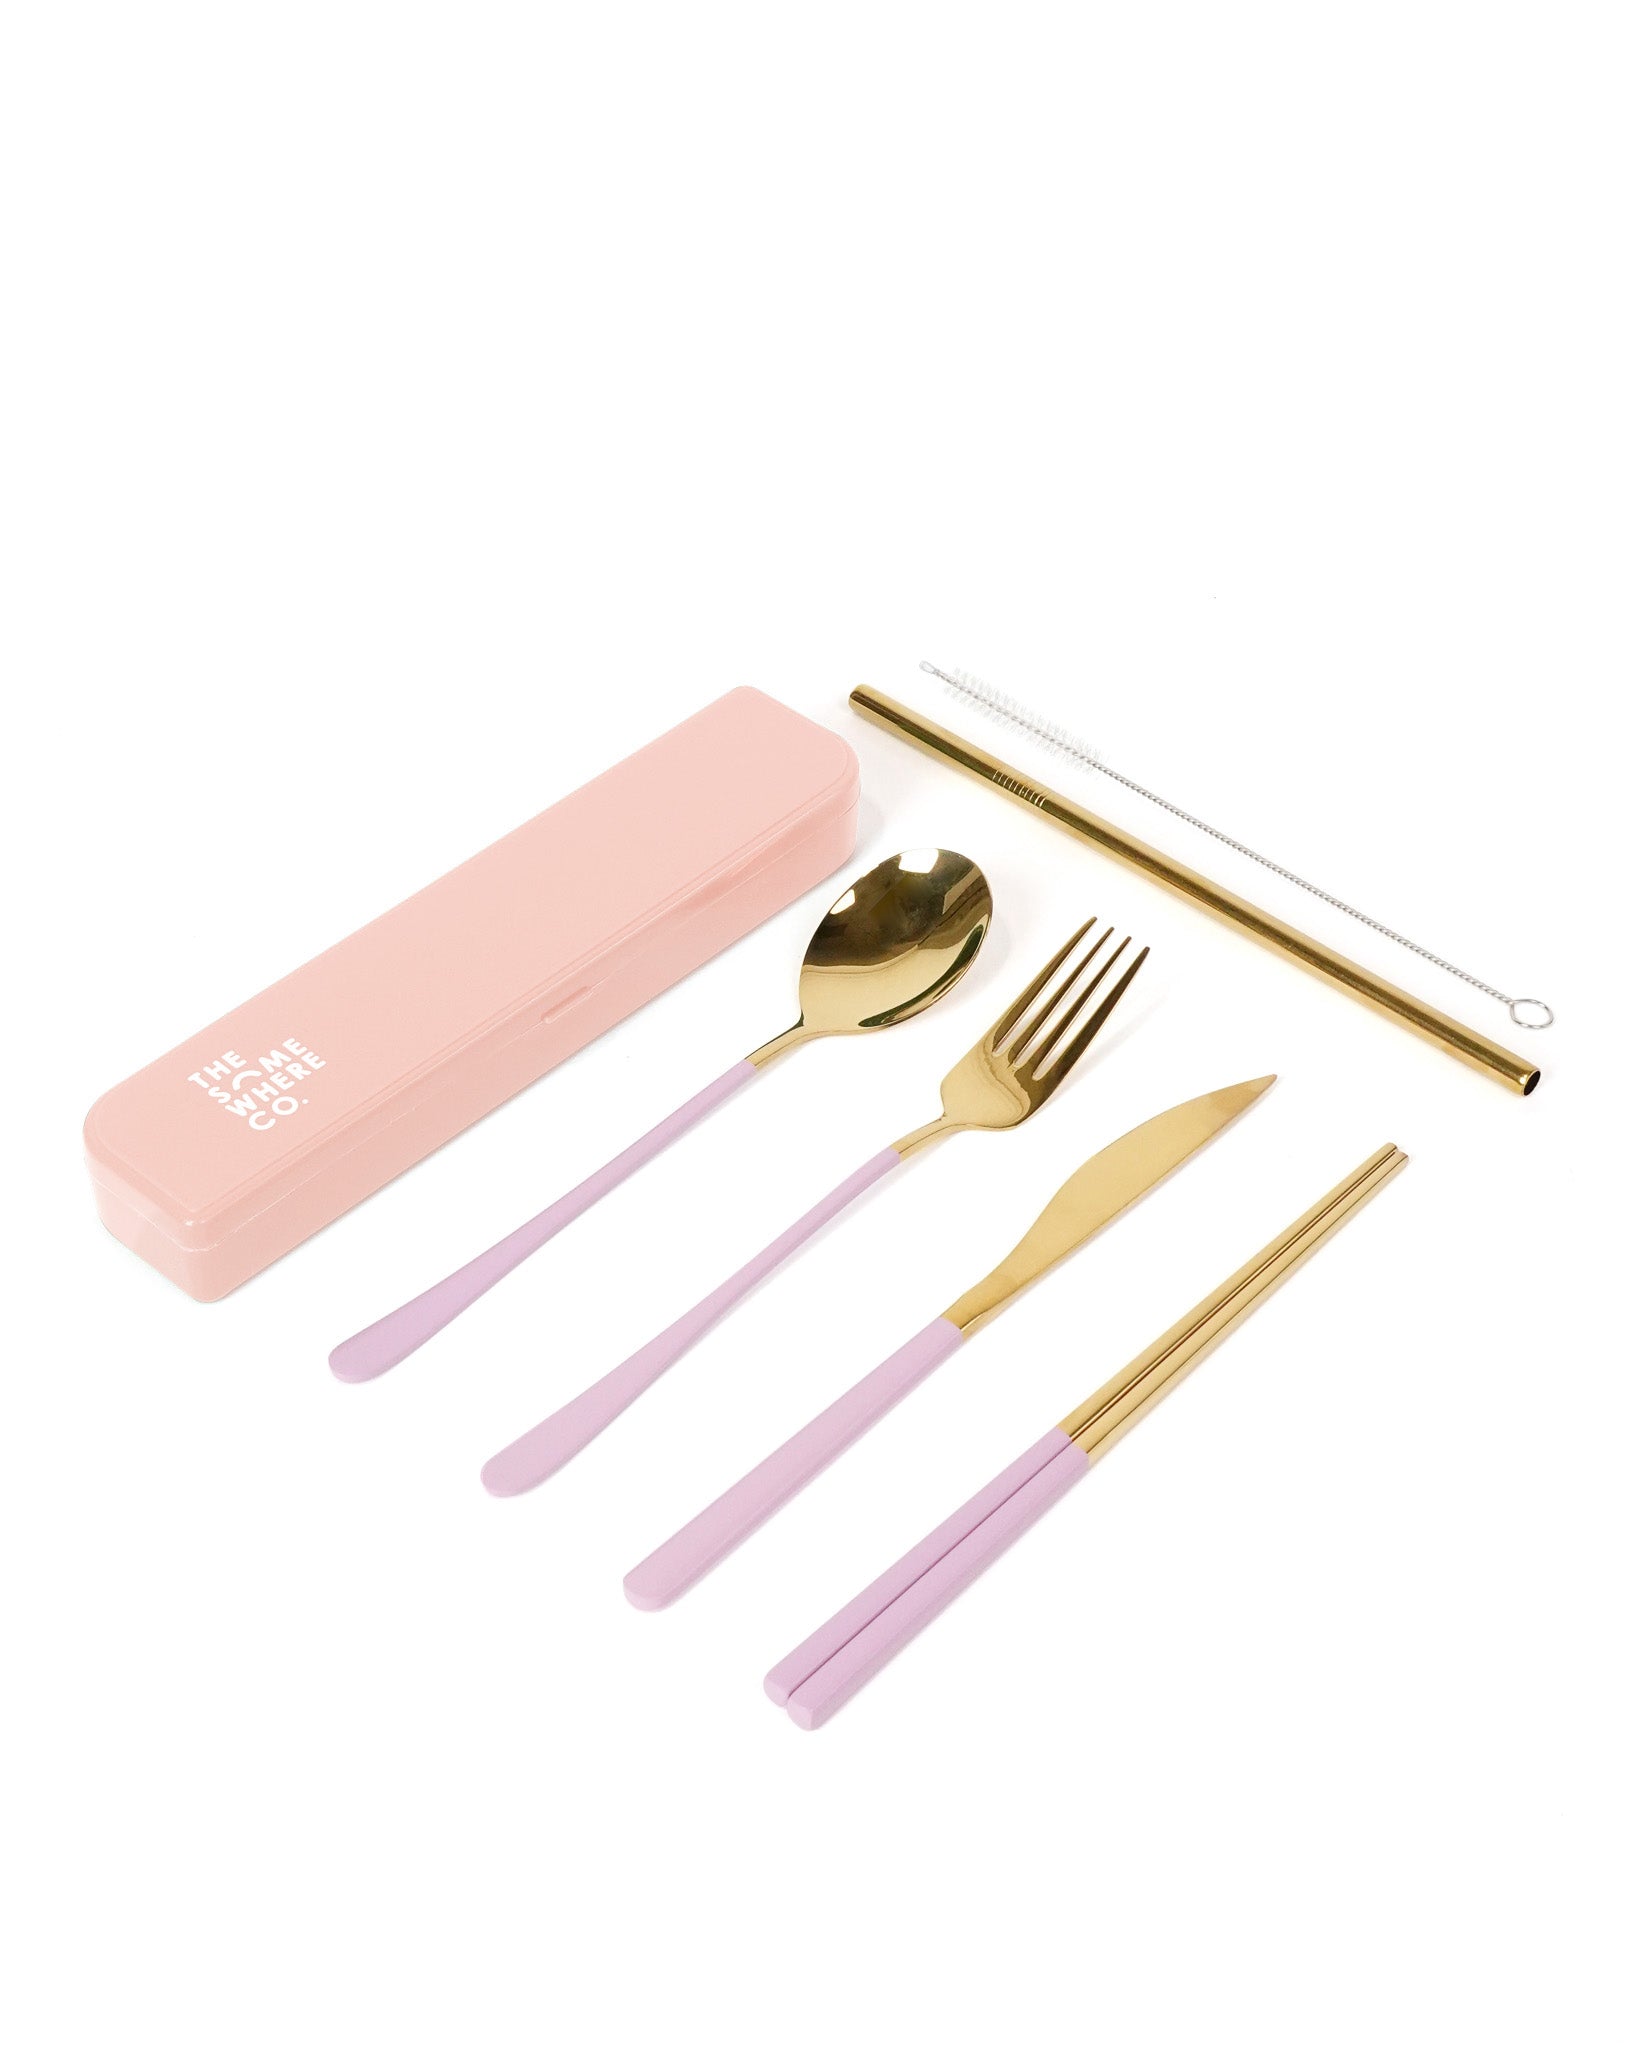 Cutlery Kit - Gold with Lilac Handle (PRE-ORDER)